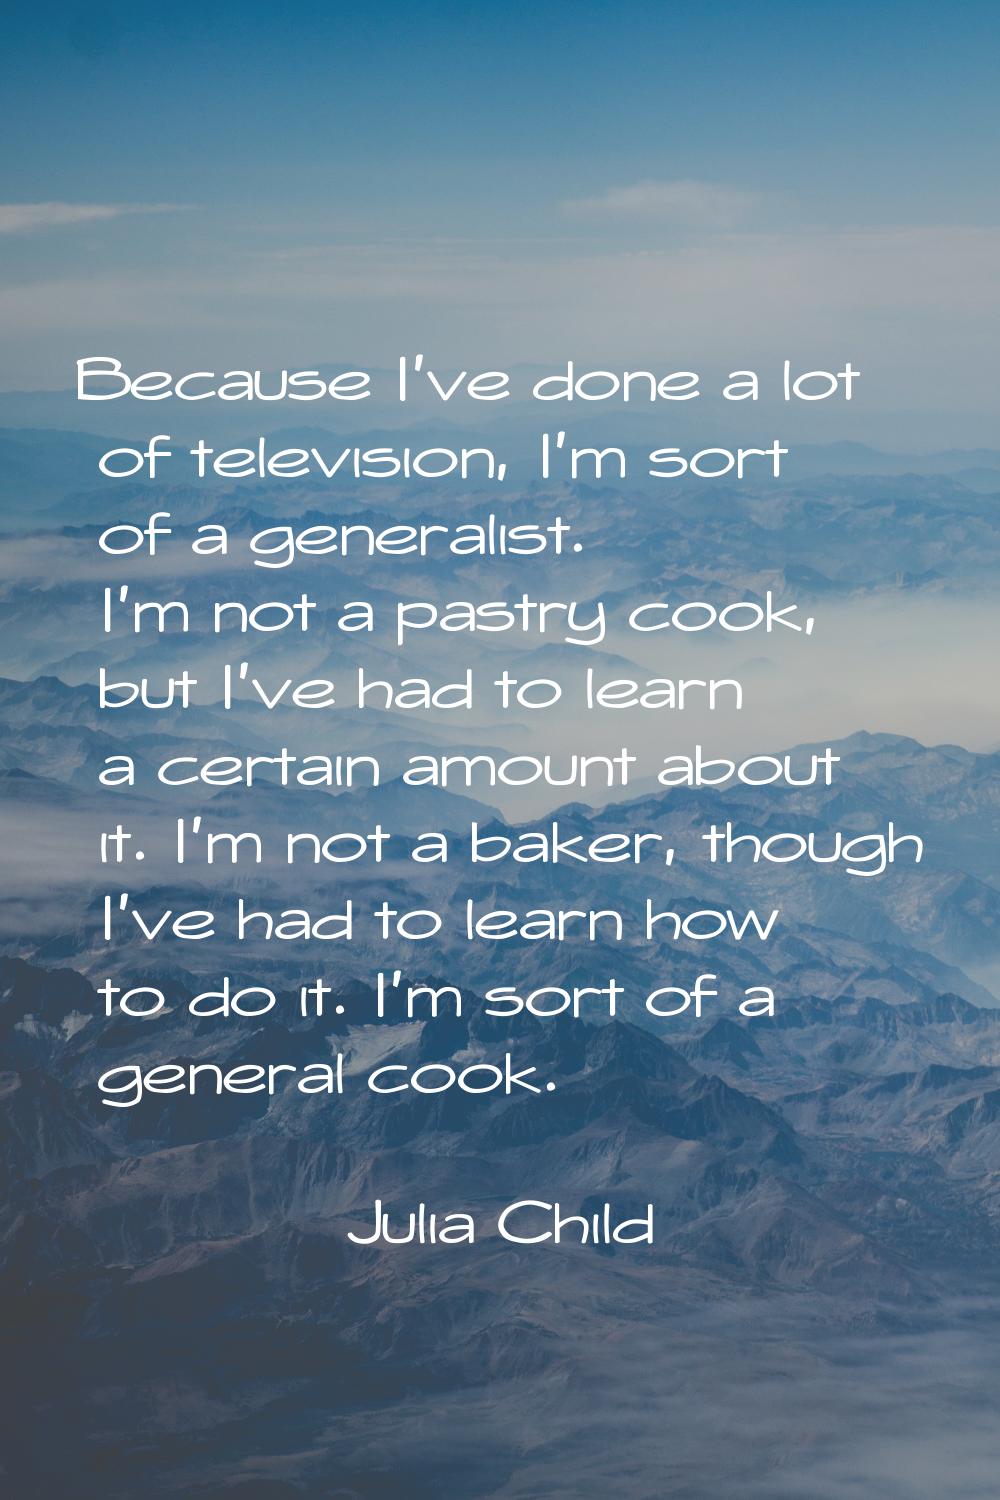 Because I've done a lot of television, I'm sort of a generalist. I'm not a pastry cook, but I've ha